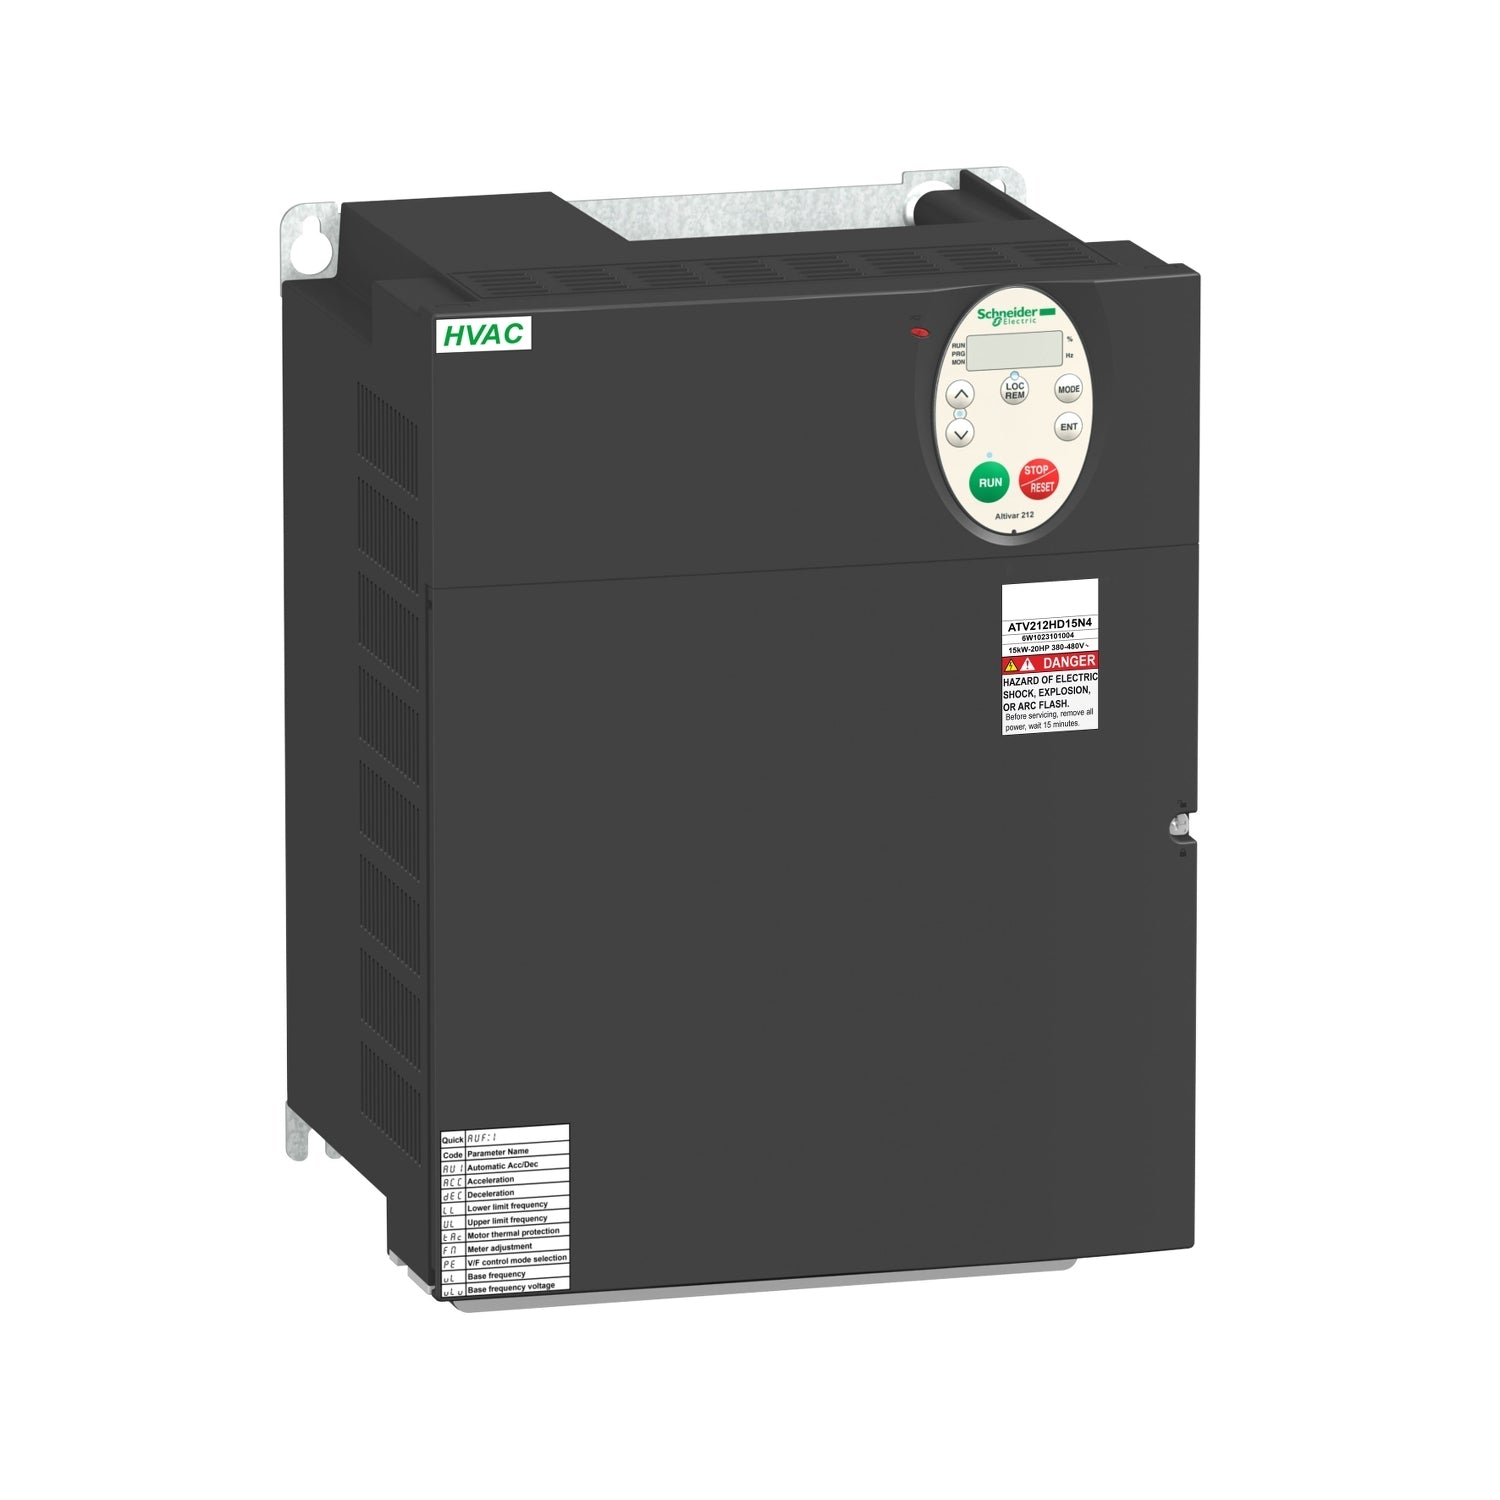 ATV212HD18N4 | Schneider Electric Variable speed drive